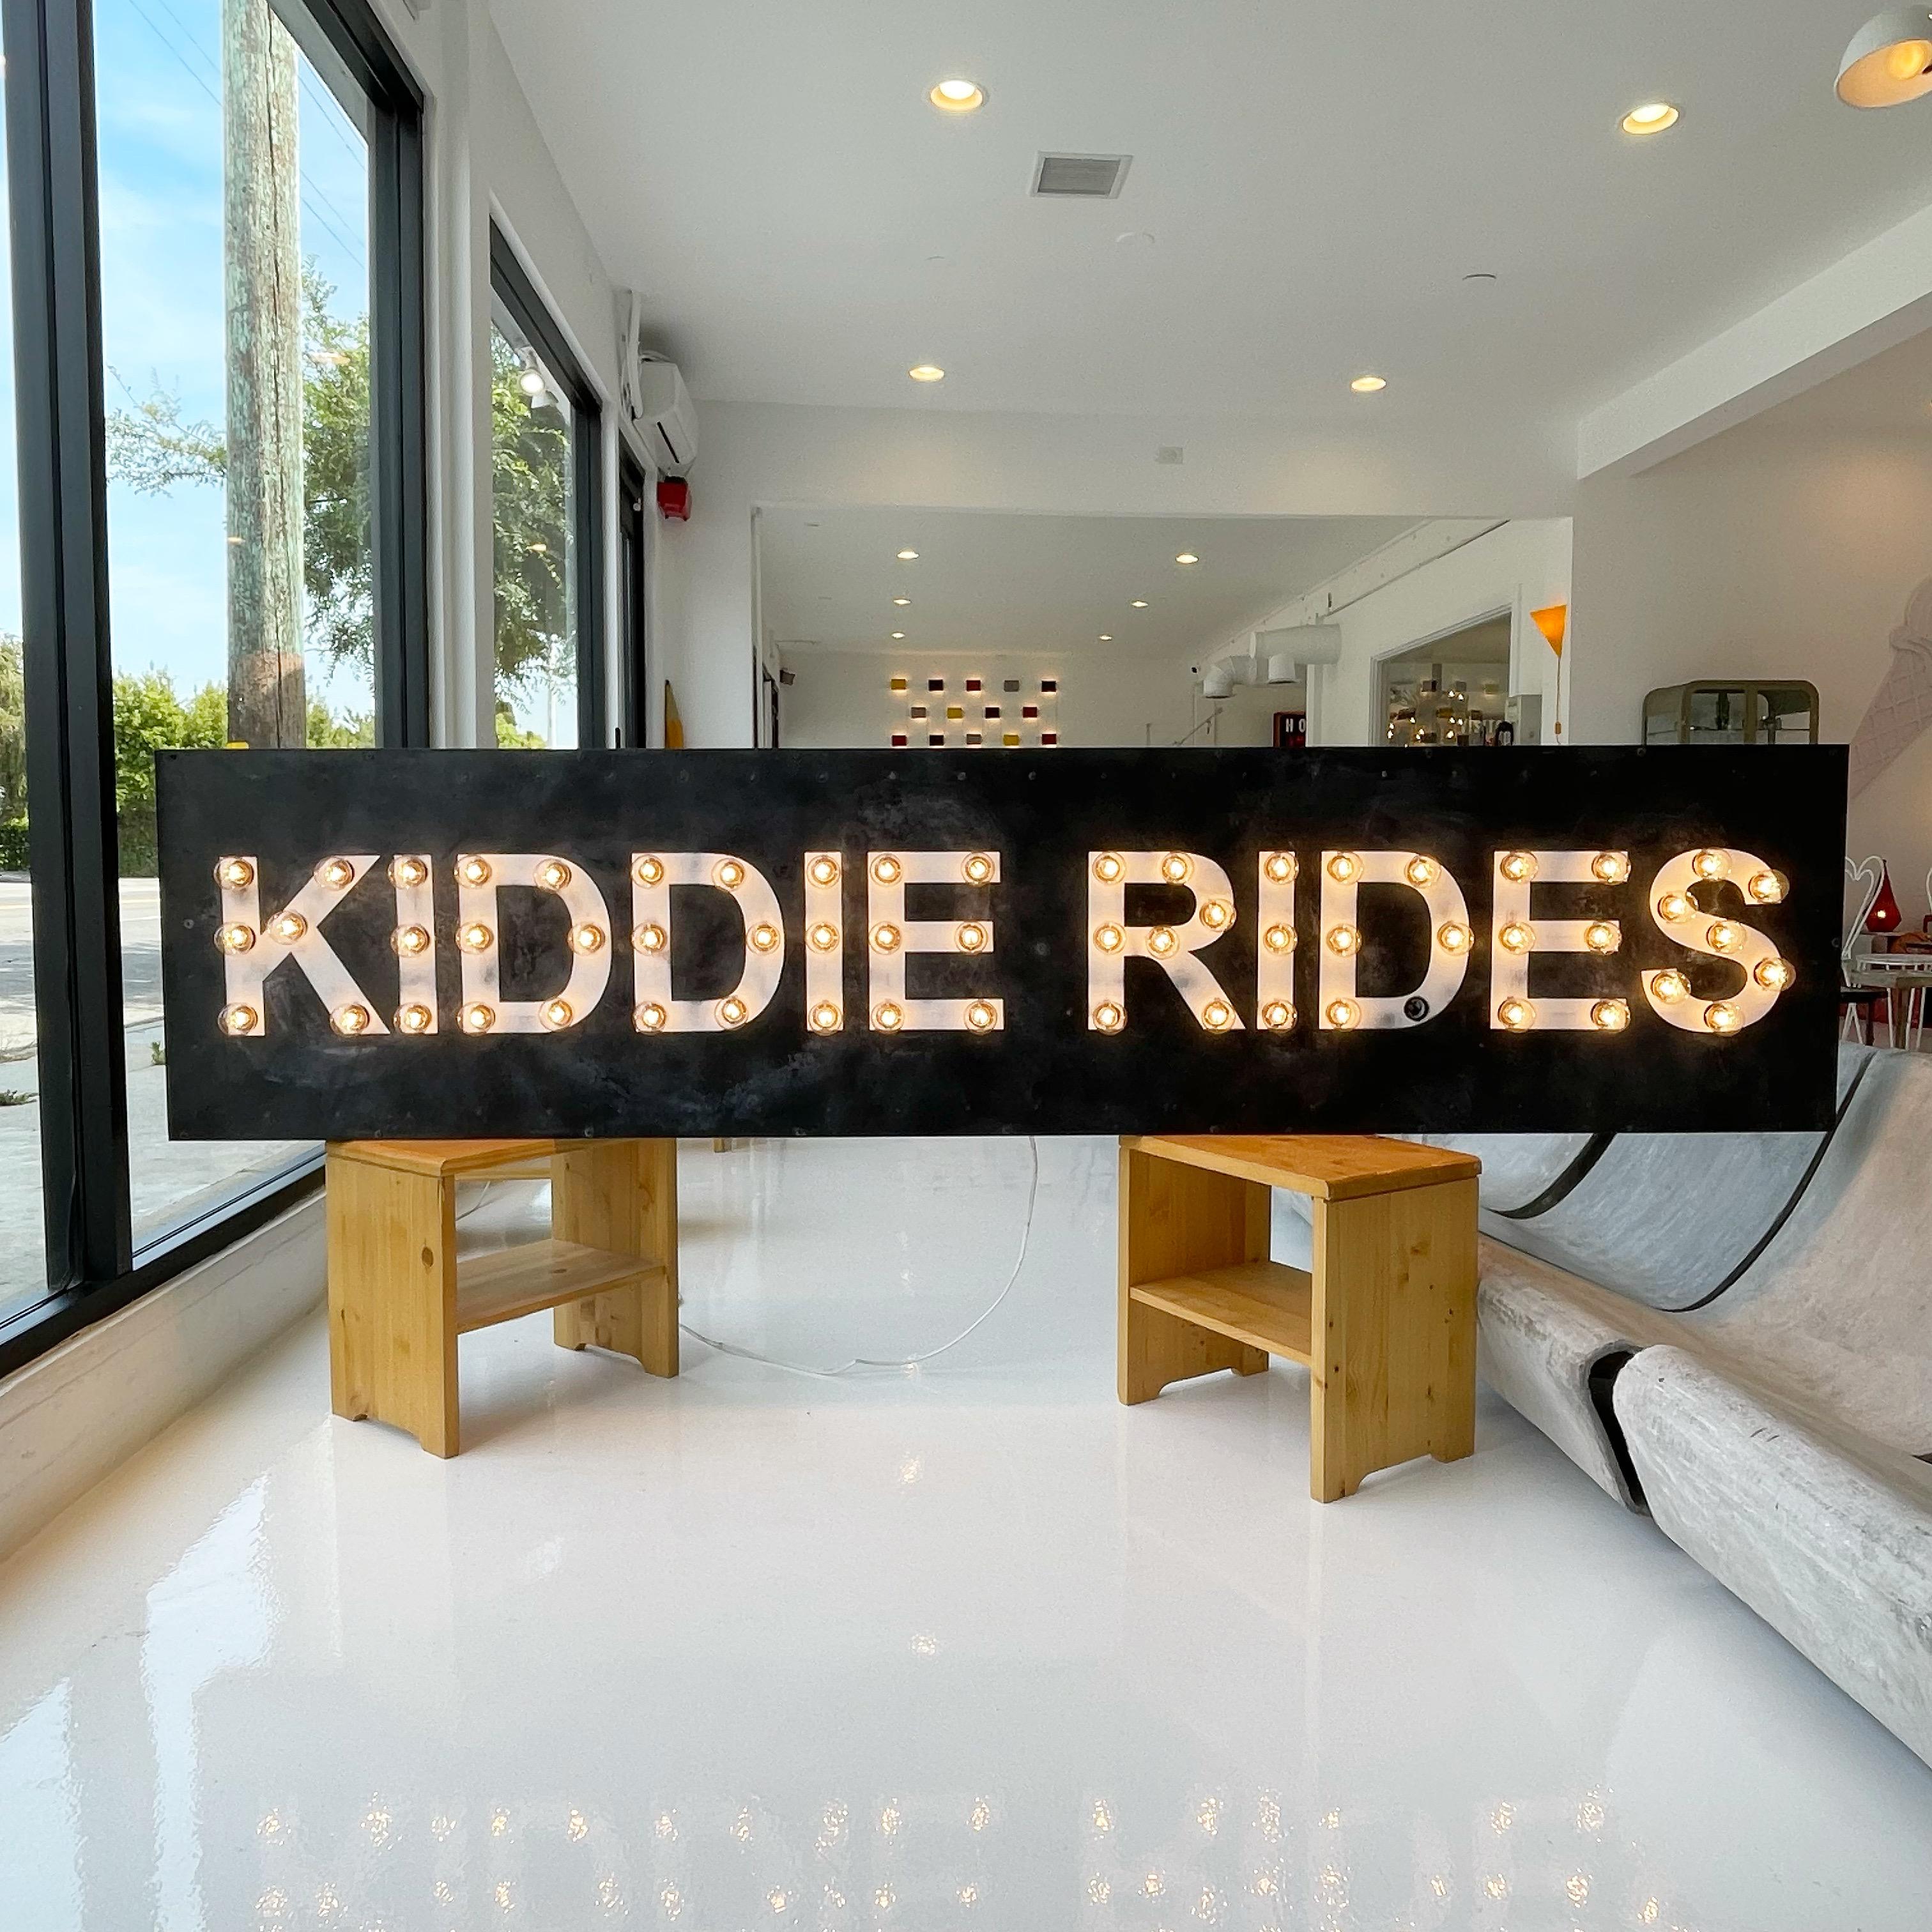 8 foot metal sign from an old carnival. Metal sign with wood backing. Hand painted wording - KIDDIE RIDES. Marquee lighting on each letter. Perfect working condition. Newly rewired. Great condition. Fun piece of wall art.